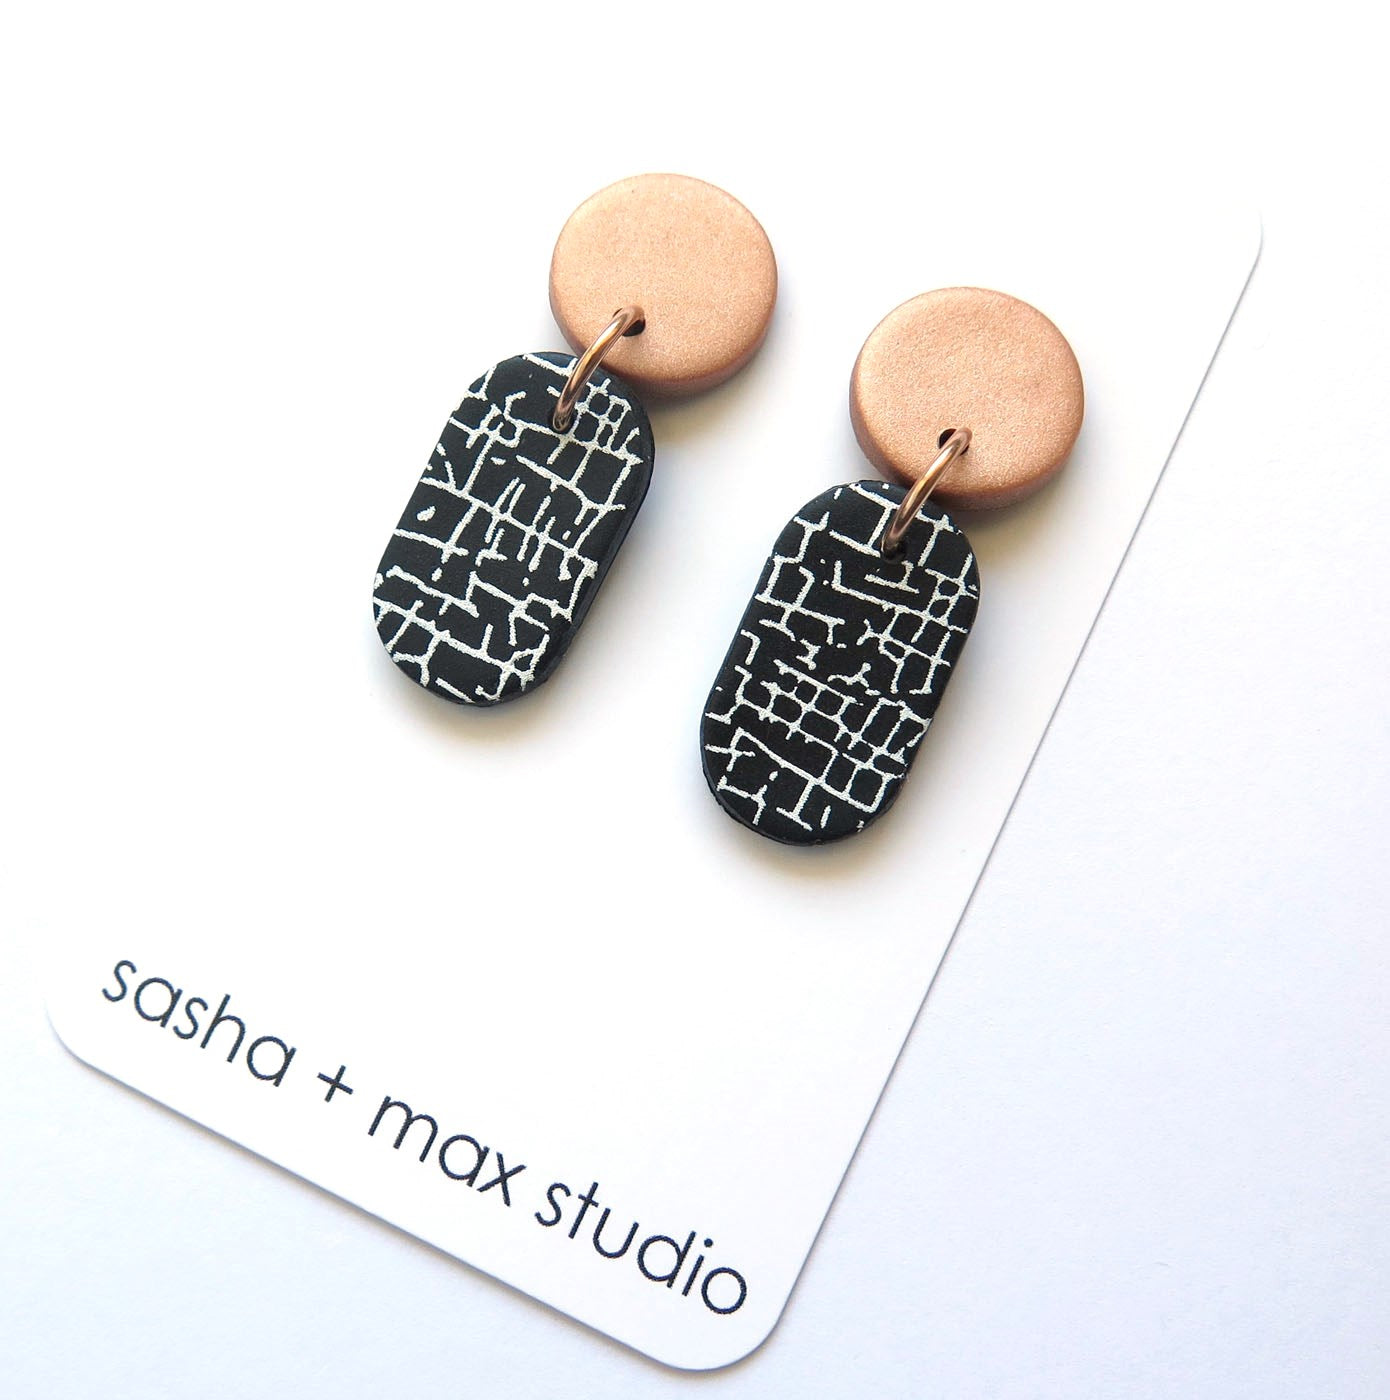 Crackle Black and White Statement Polymer Clay Earrings - Oval drop